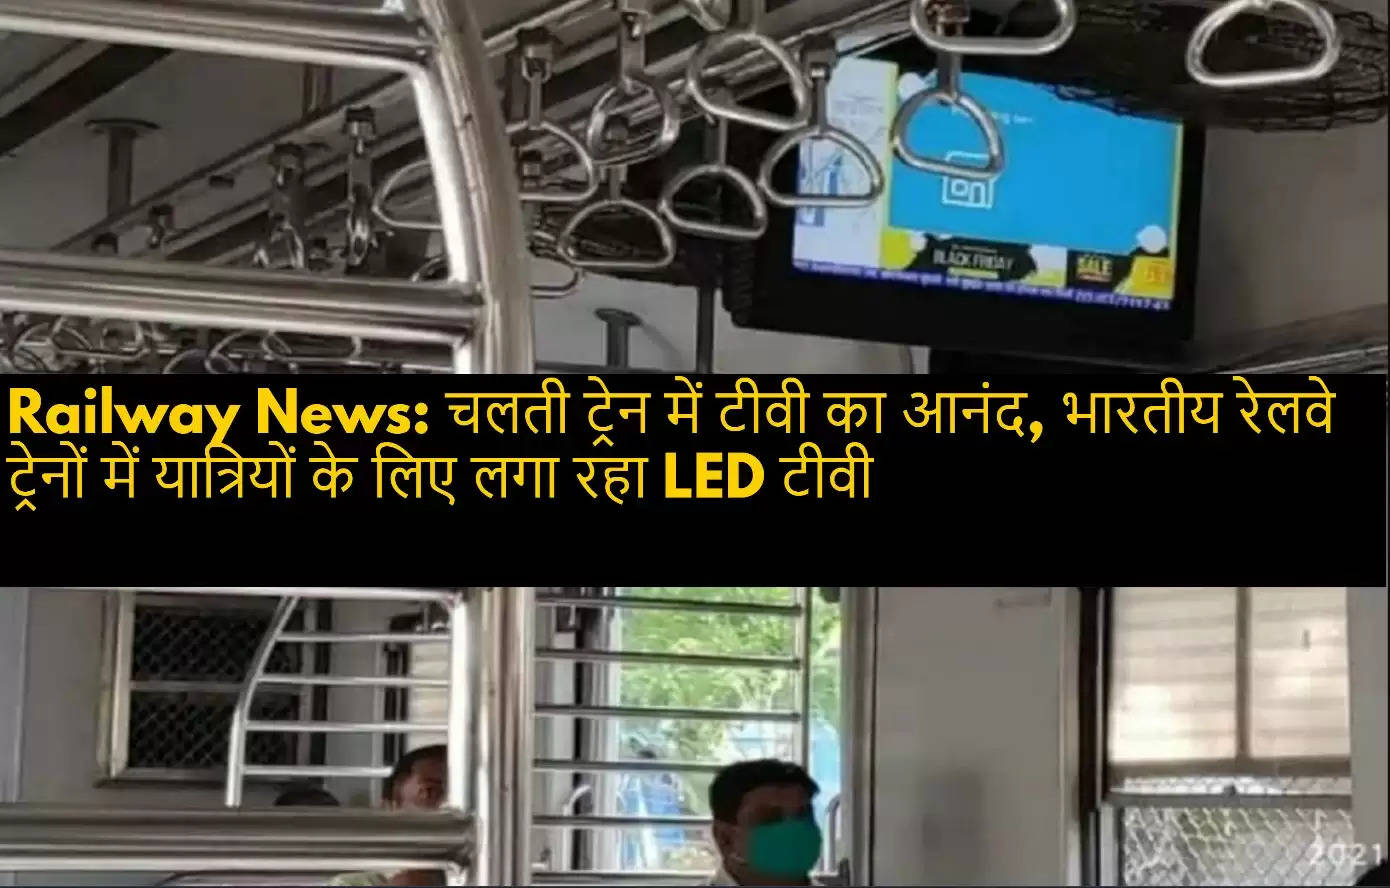 Railway News: Enjoy TV in moving train, Indian Railways is installing LED TV for passengers in trains